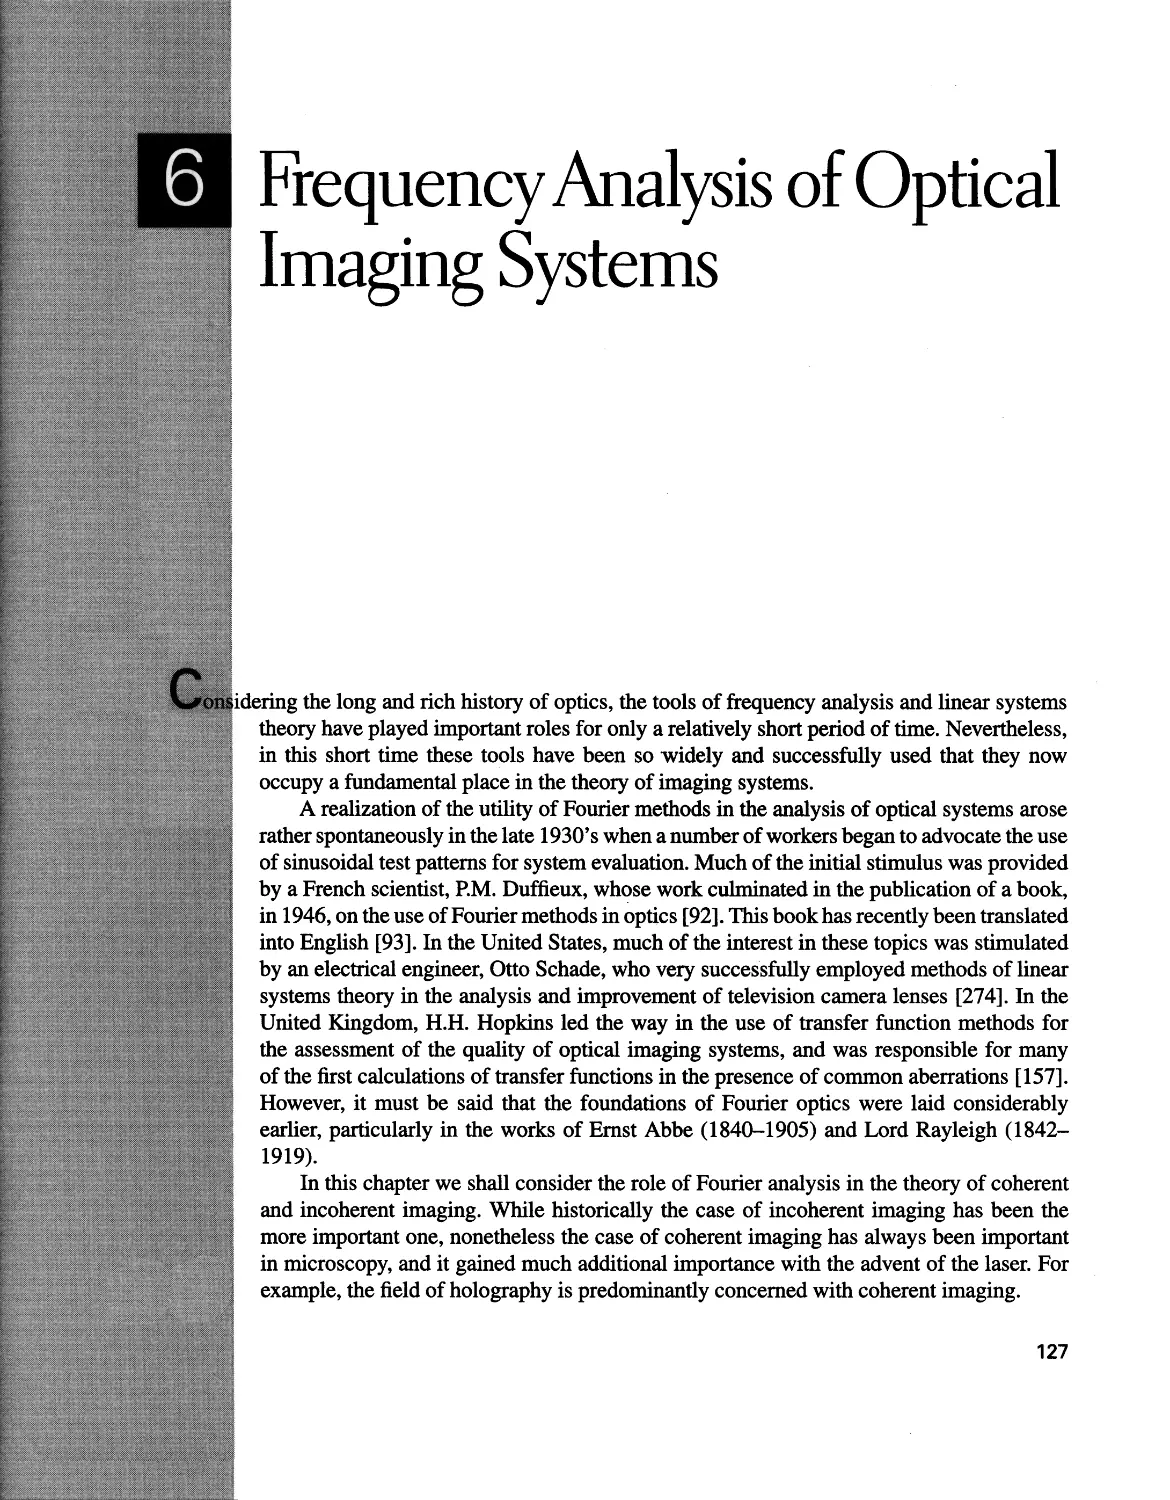 6 Frequency Analysis of Optical Imaging Systems 127